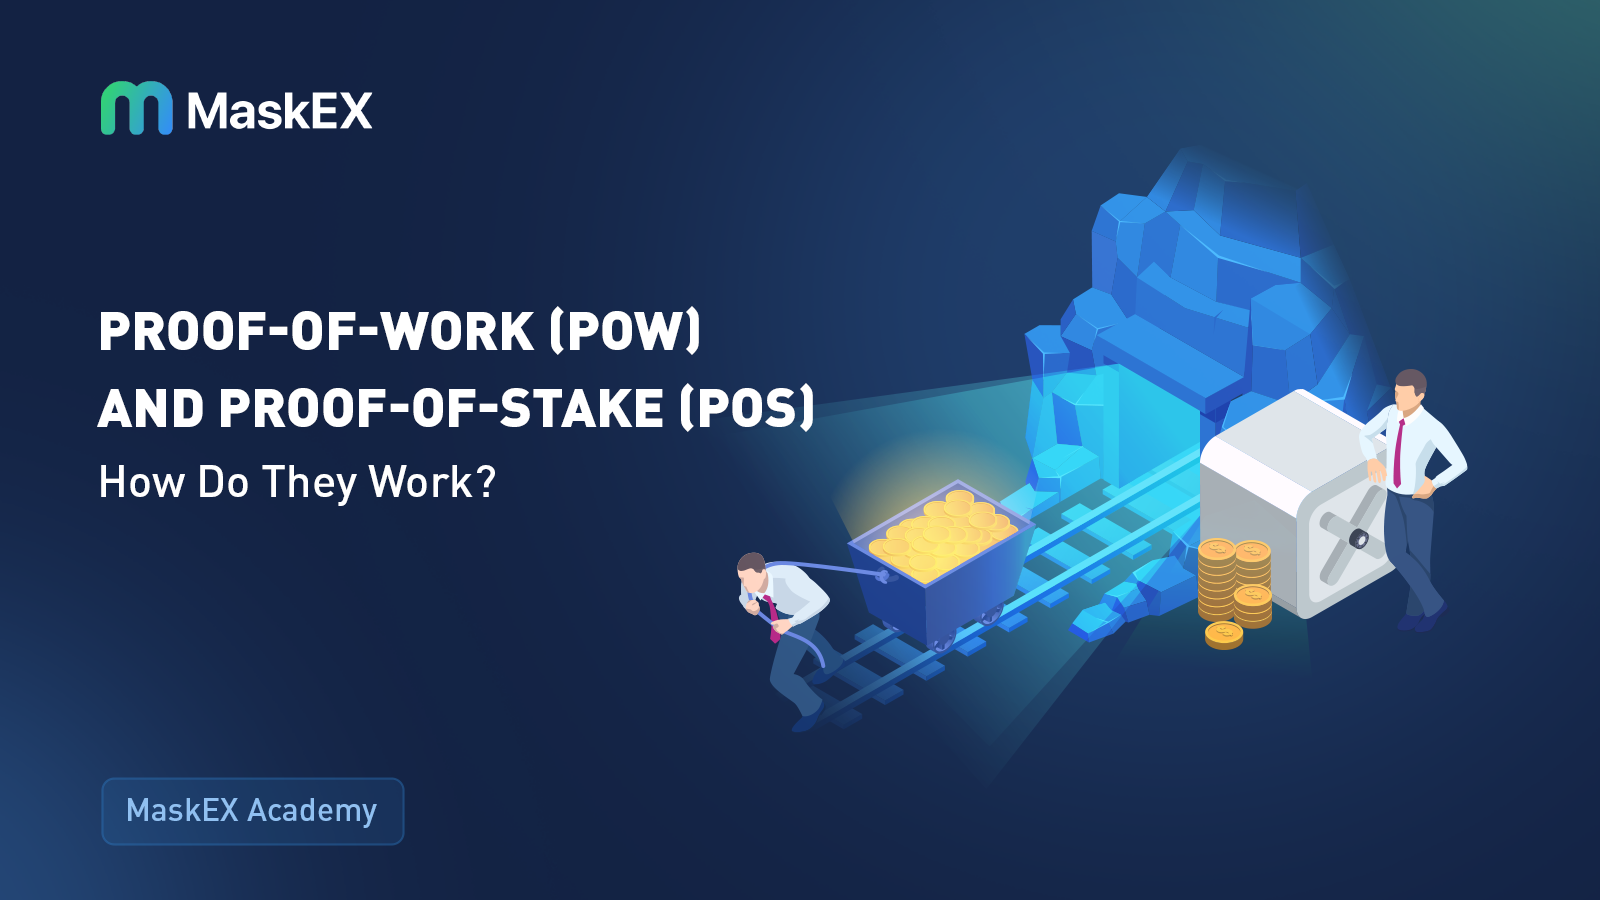 Proof-of-Work (PoW) and Proof-of-Stake (PoS): How Do They Work?